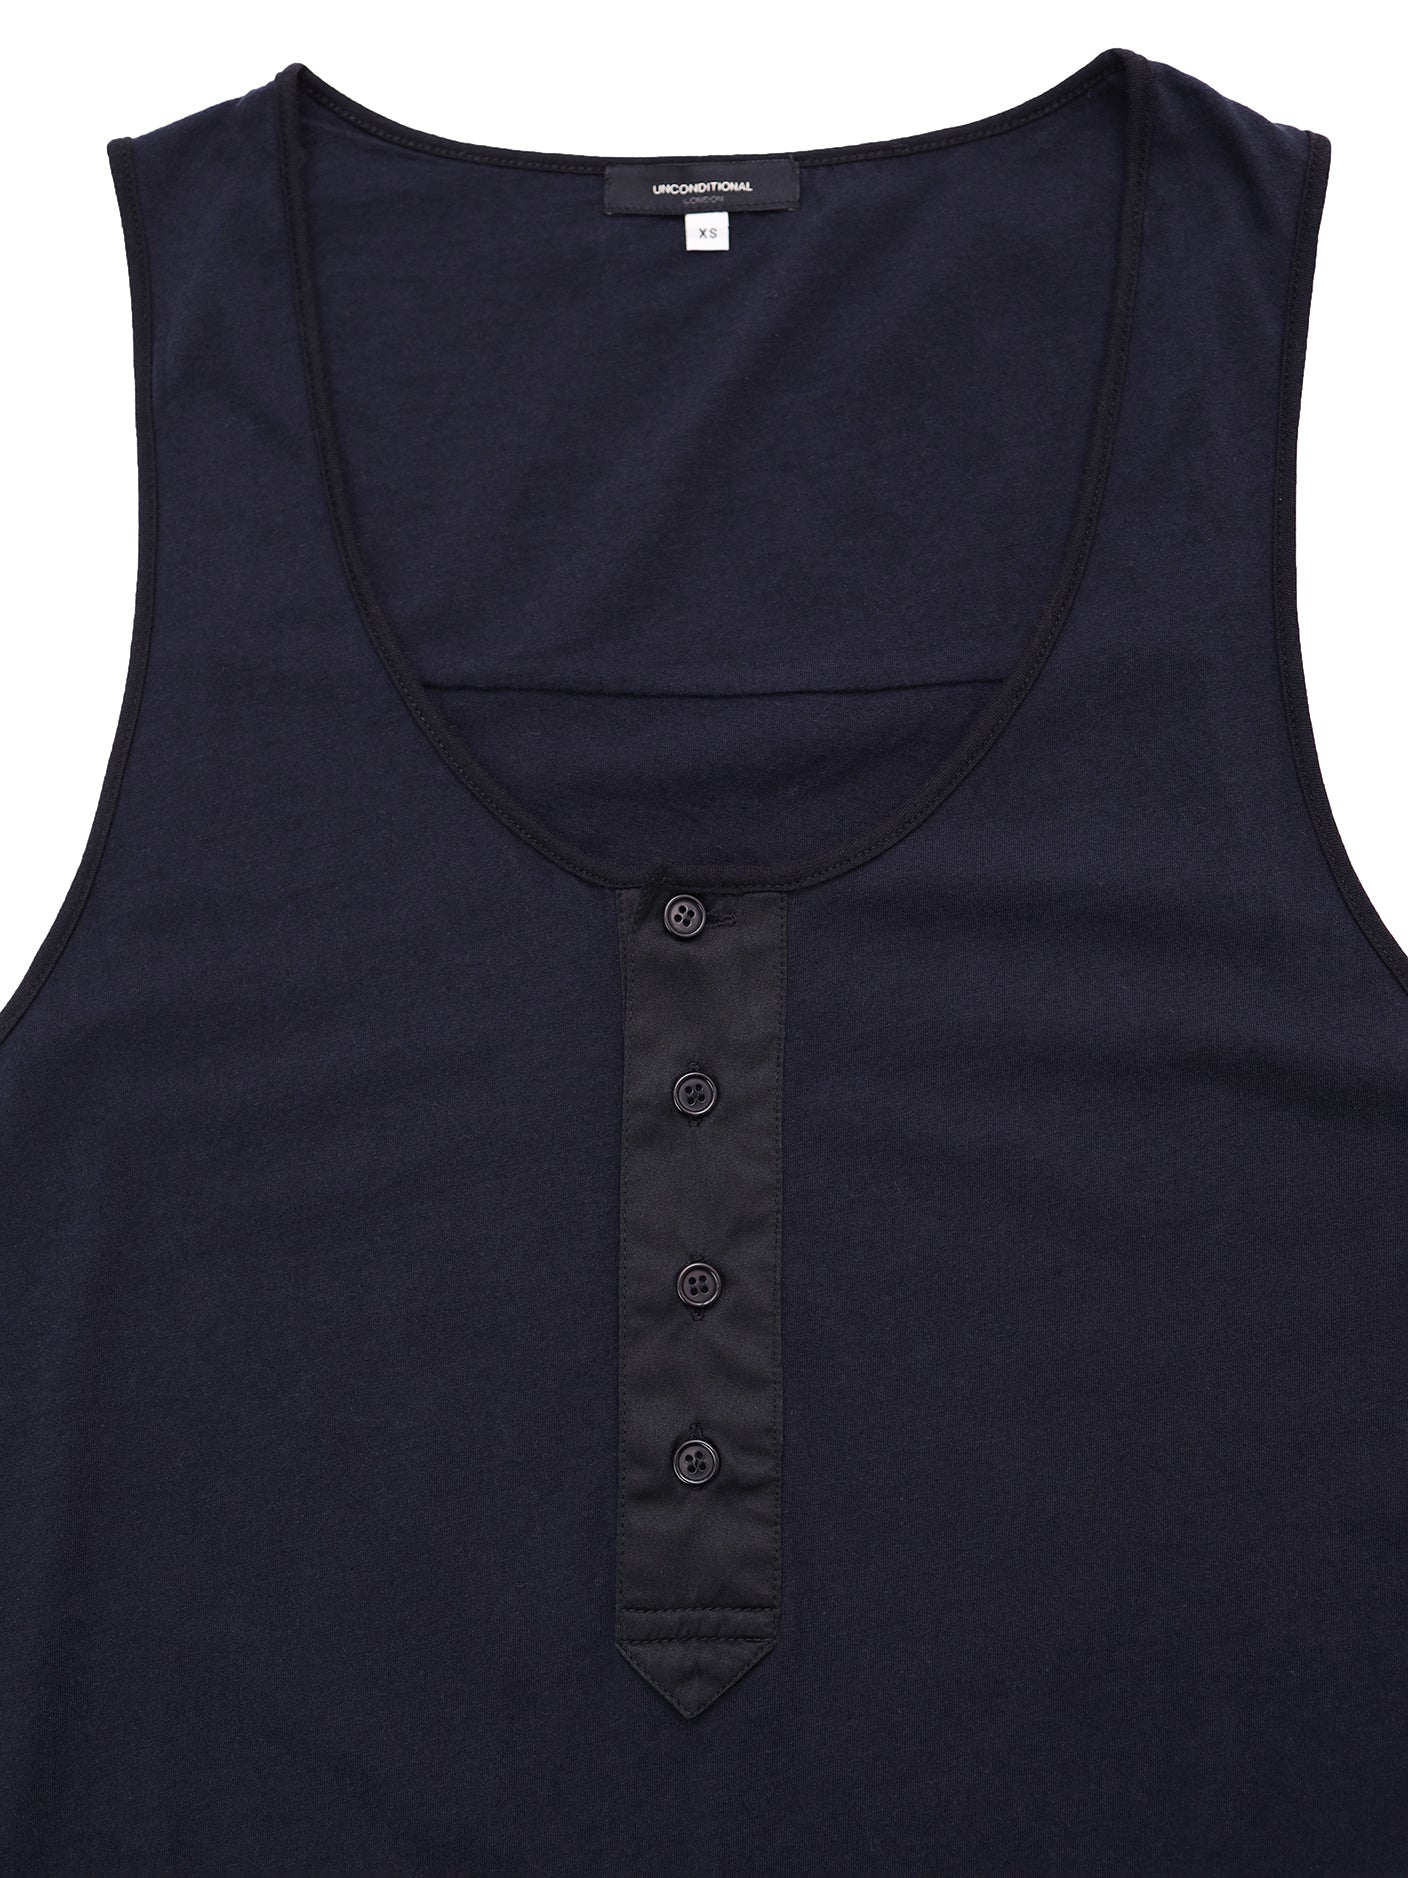 Navy Blue Vest With Buttons Detailing